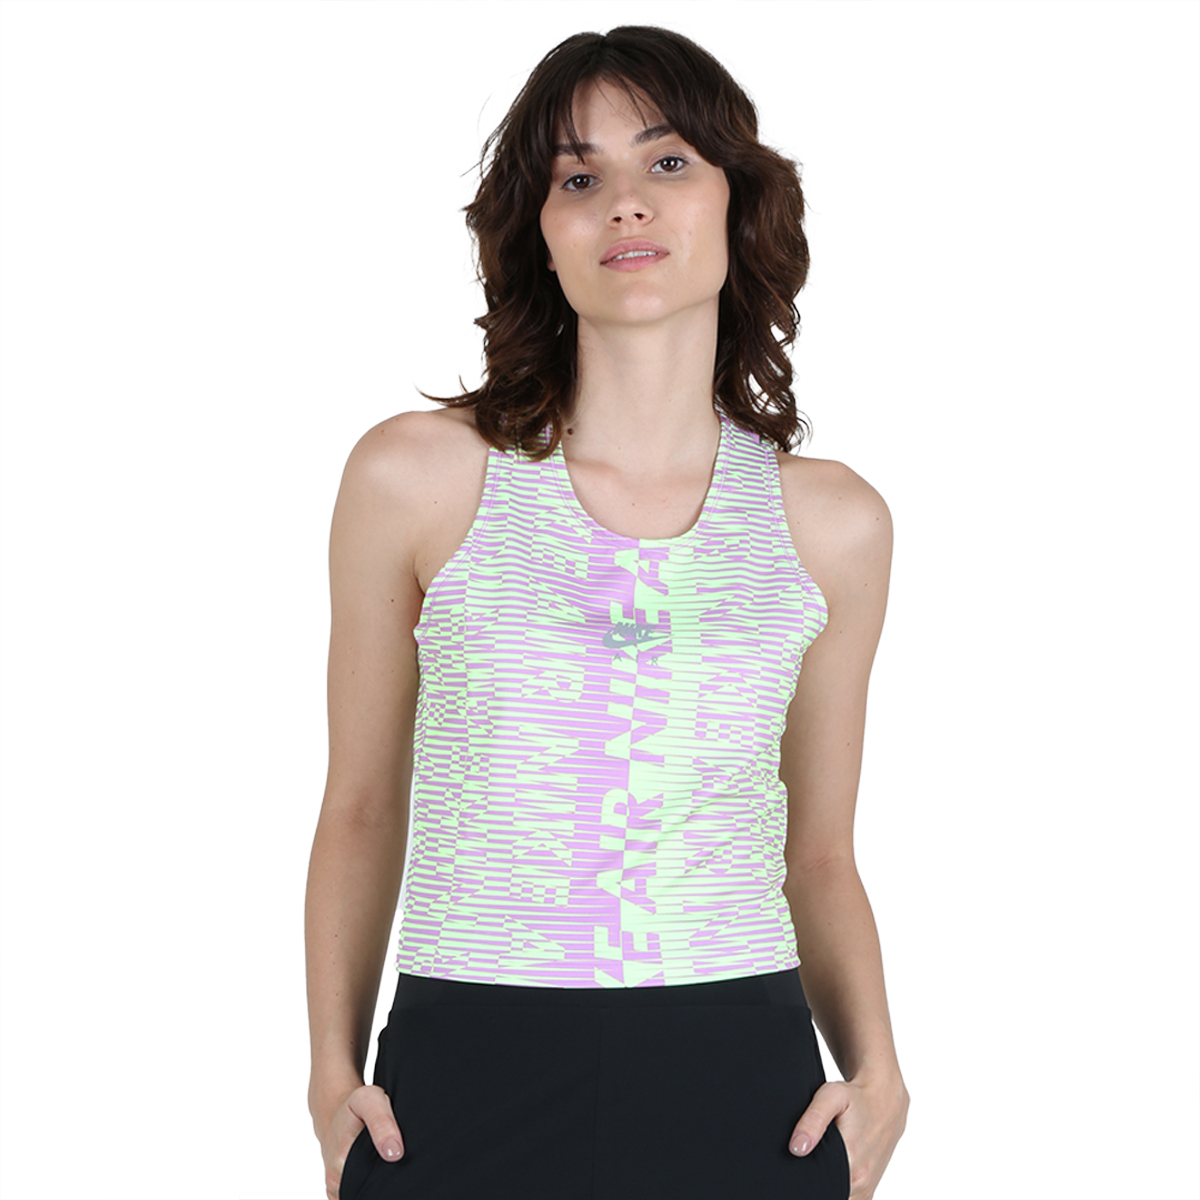 Musculosa Nike Air,  image number null